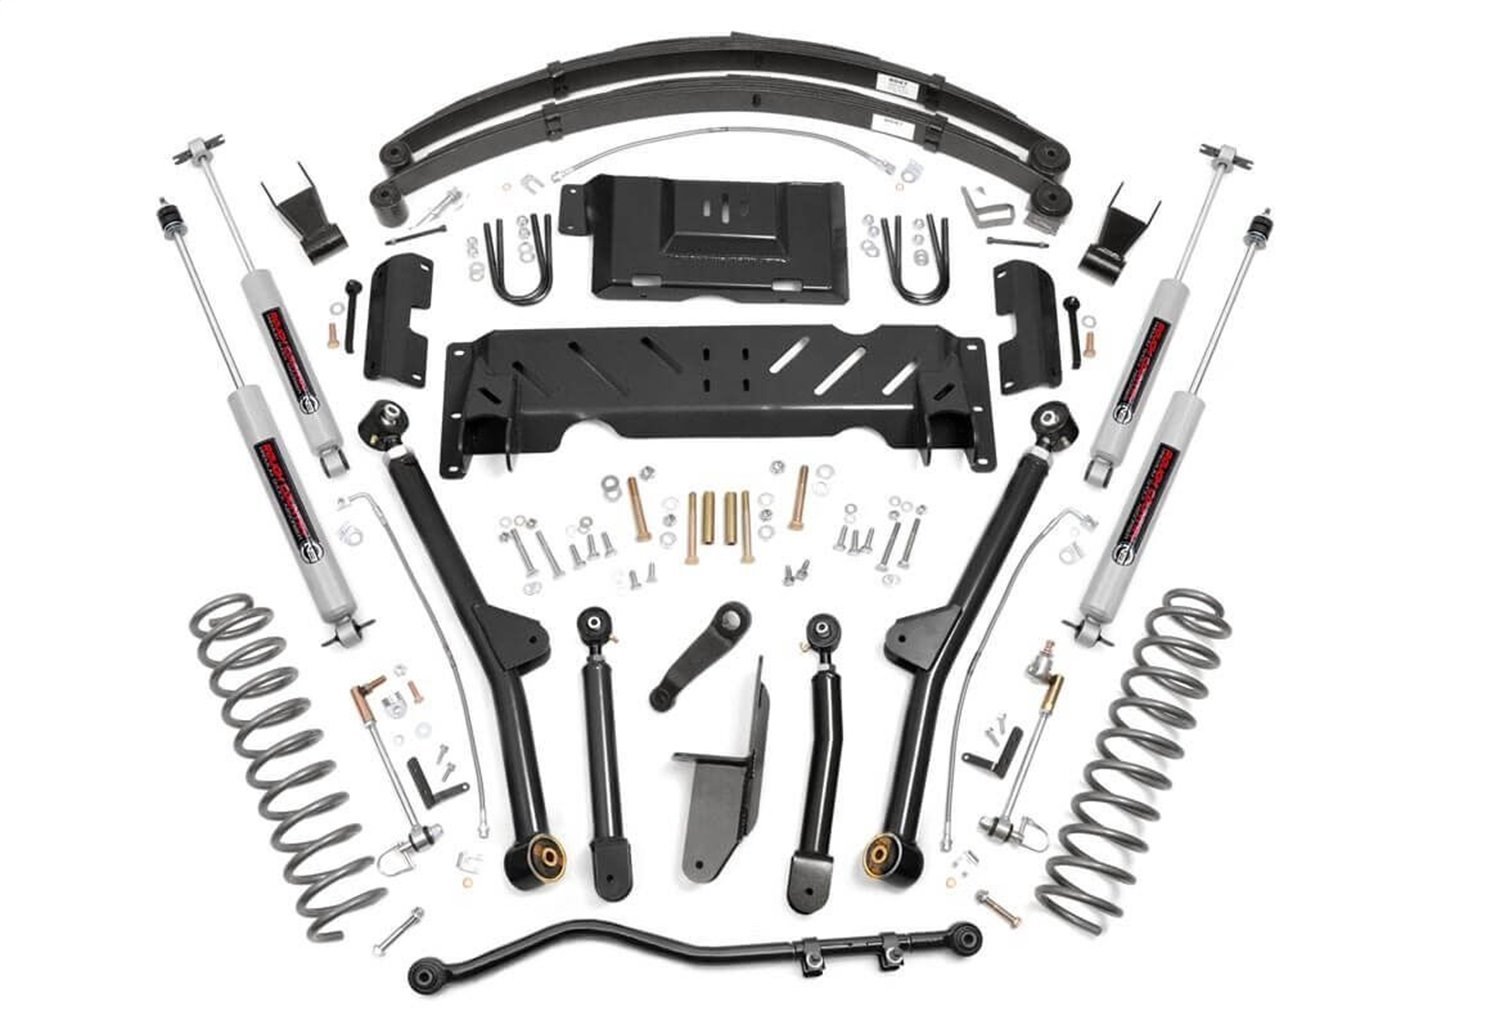 67222 6.5-inch X-Series Long Arm Suspension Lift System